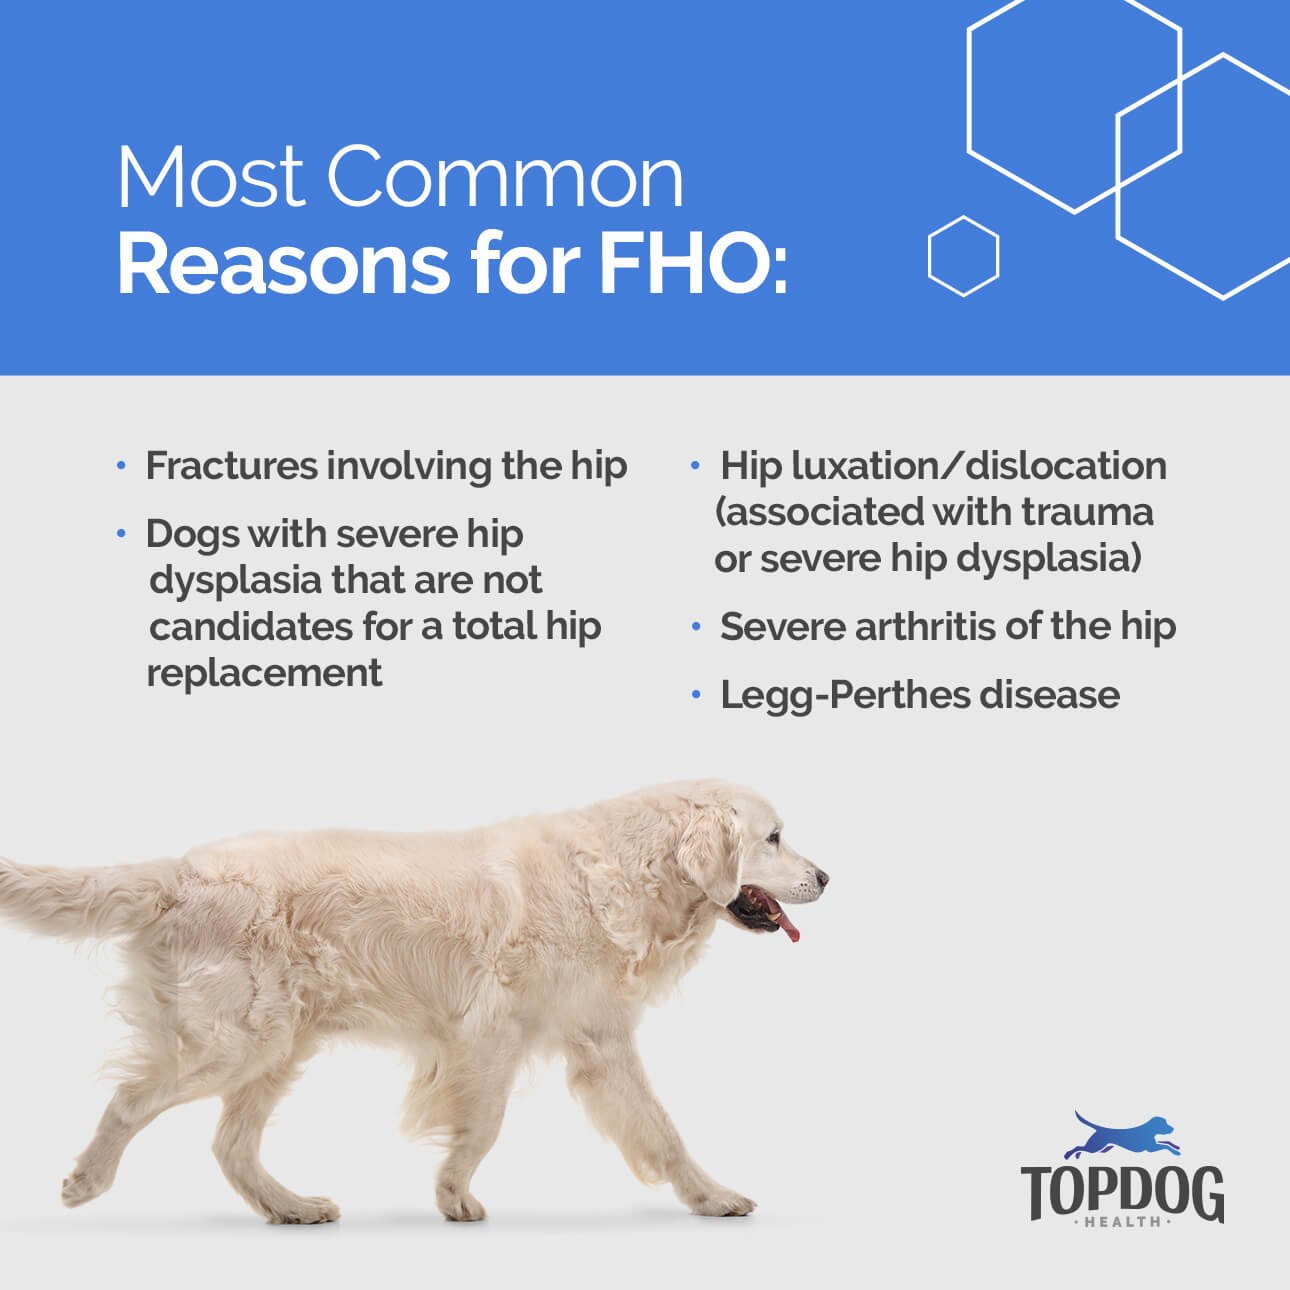 Most common reasons for FHO surgery are fractures, severe hip dysplasia, hip dislocation, severe arthritis and Legg-Perthes disease